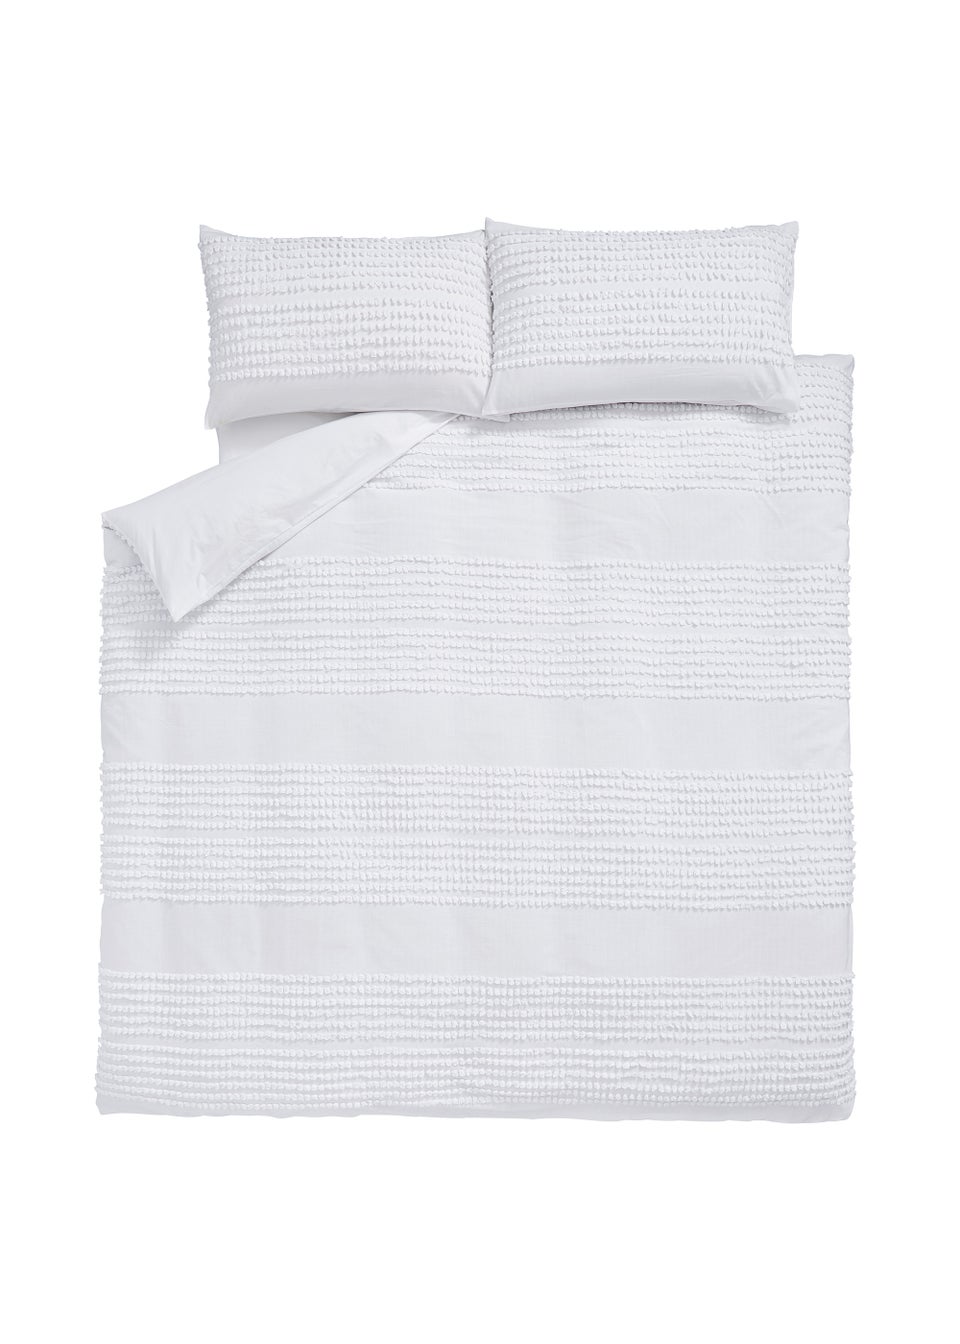 Bianca Fine Linens Malmo Tufted Bands Cotton Duvet Cover